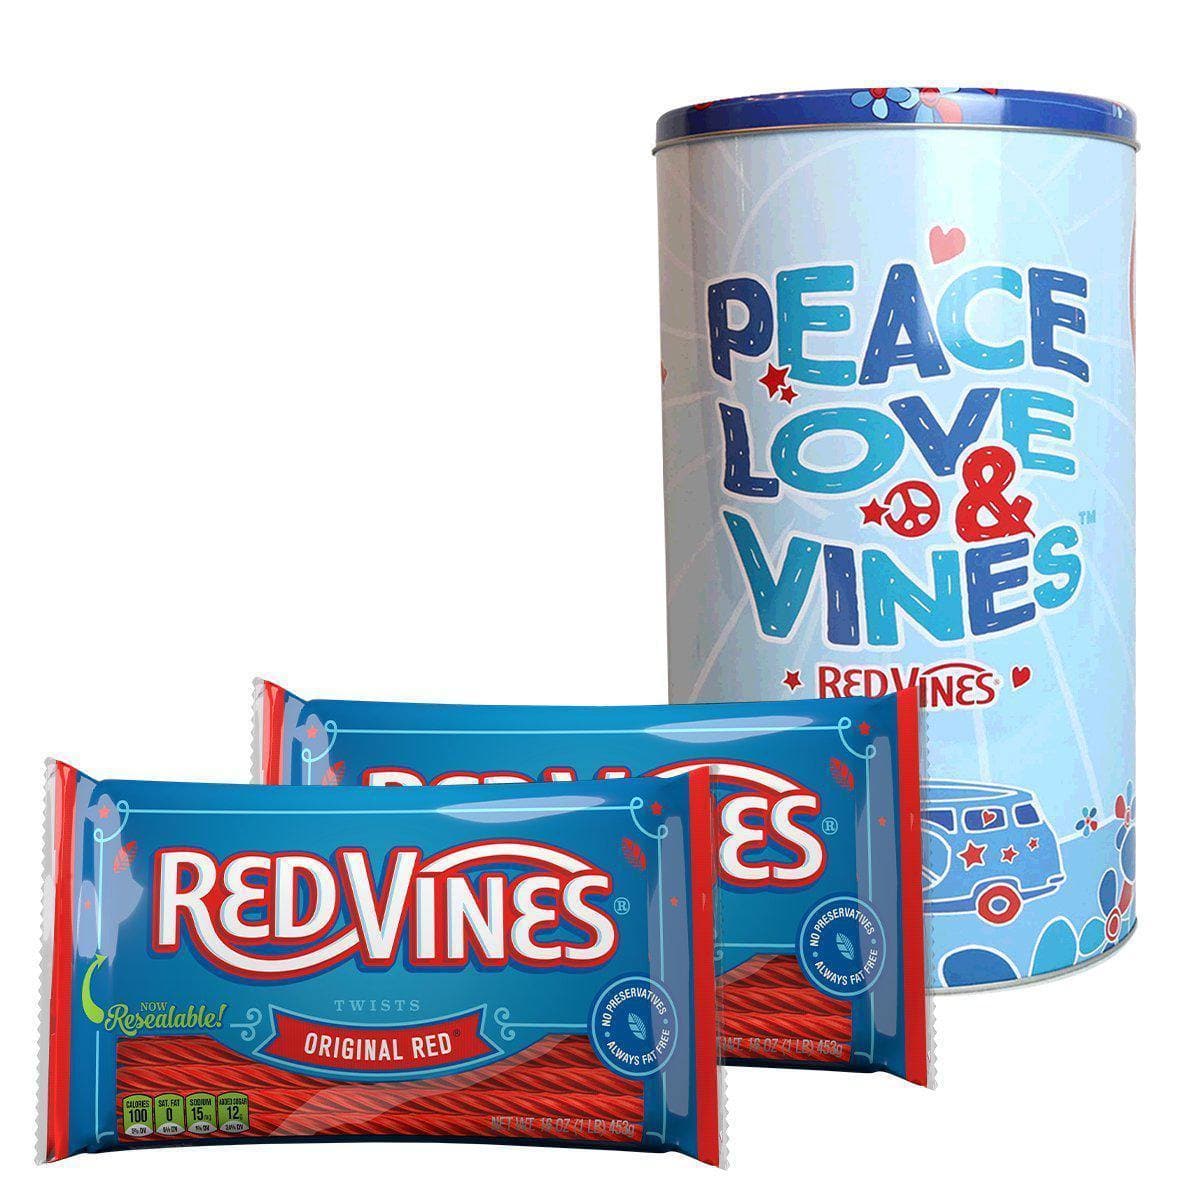 RED VINES Tin & Two 1-Pound Bags of Original Red Licorice Twists